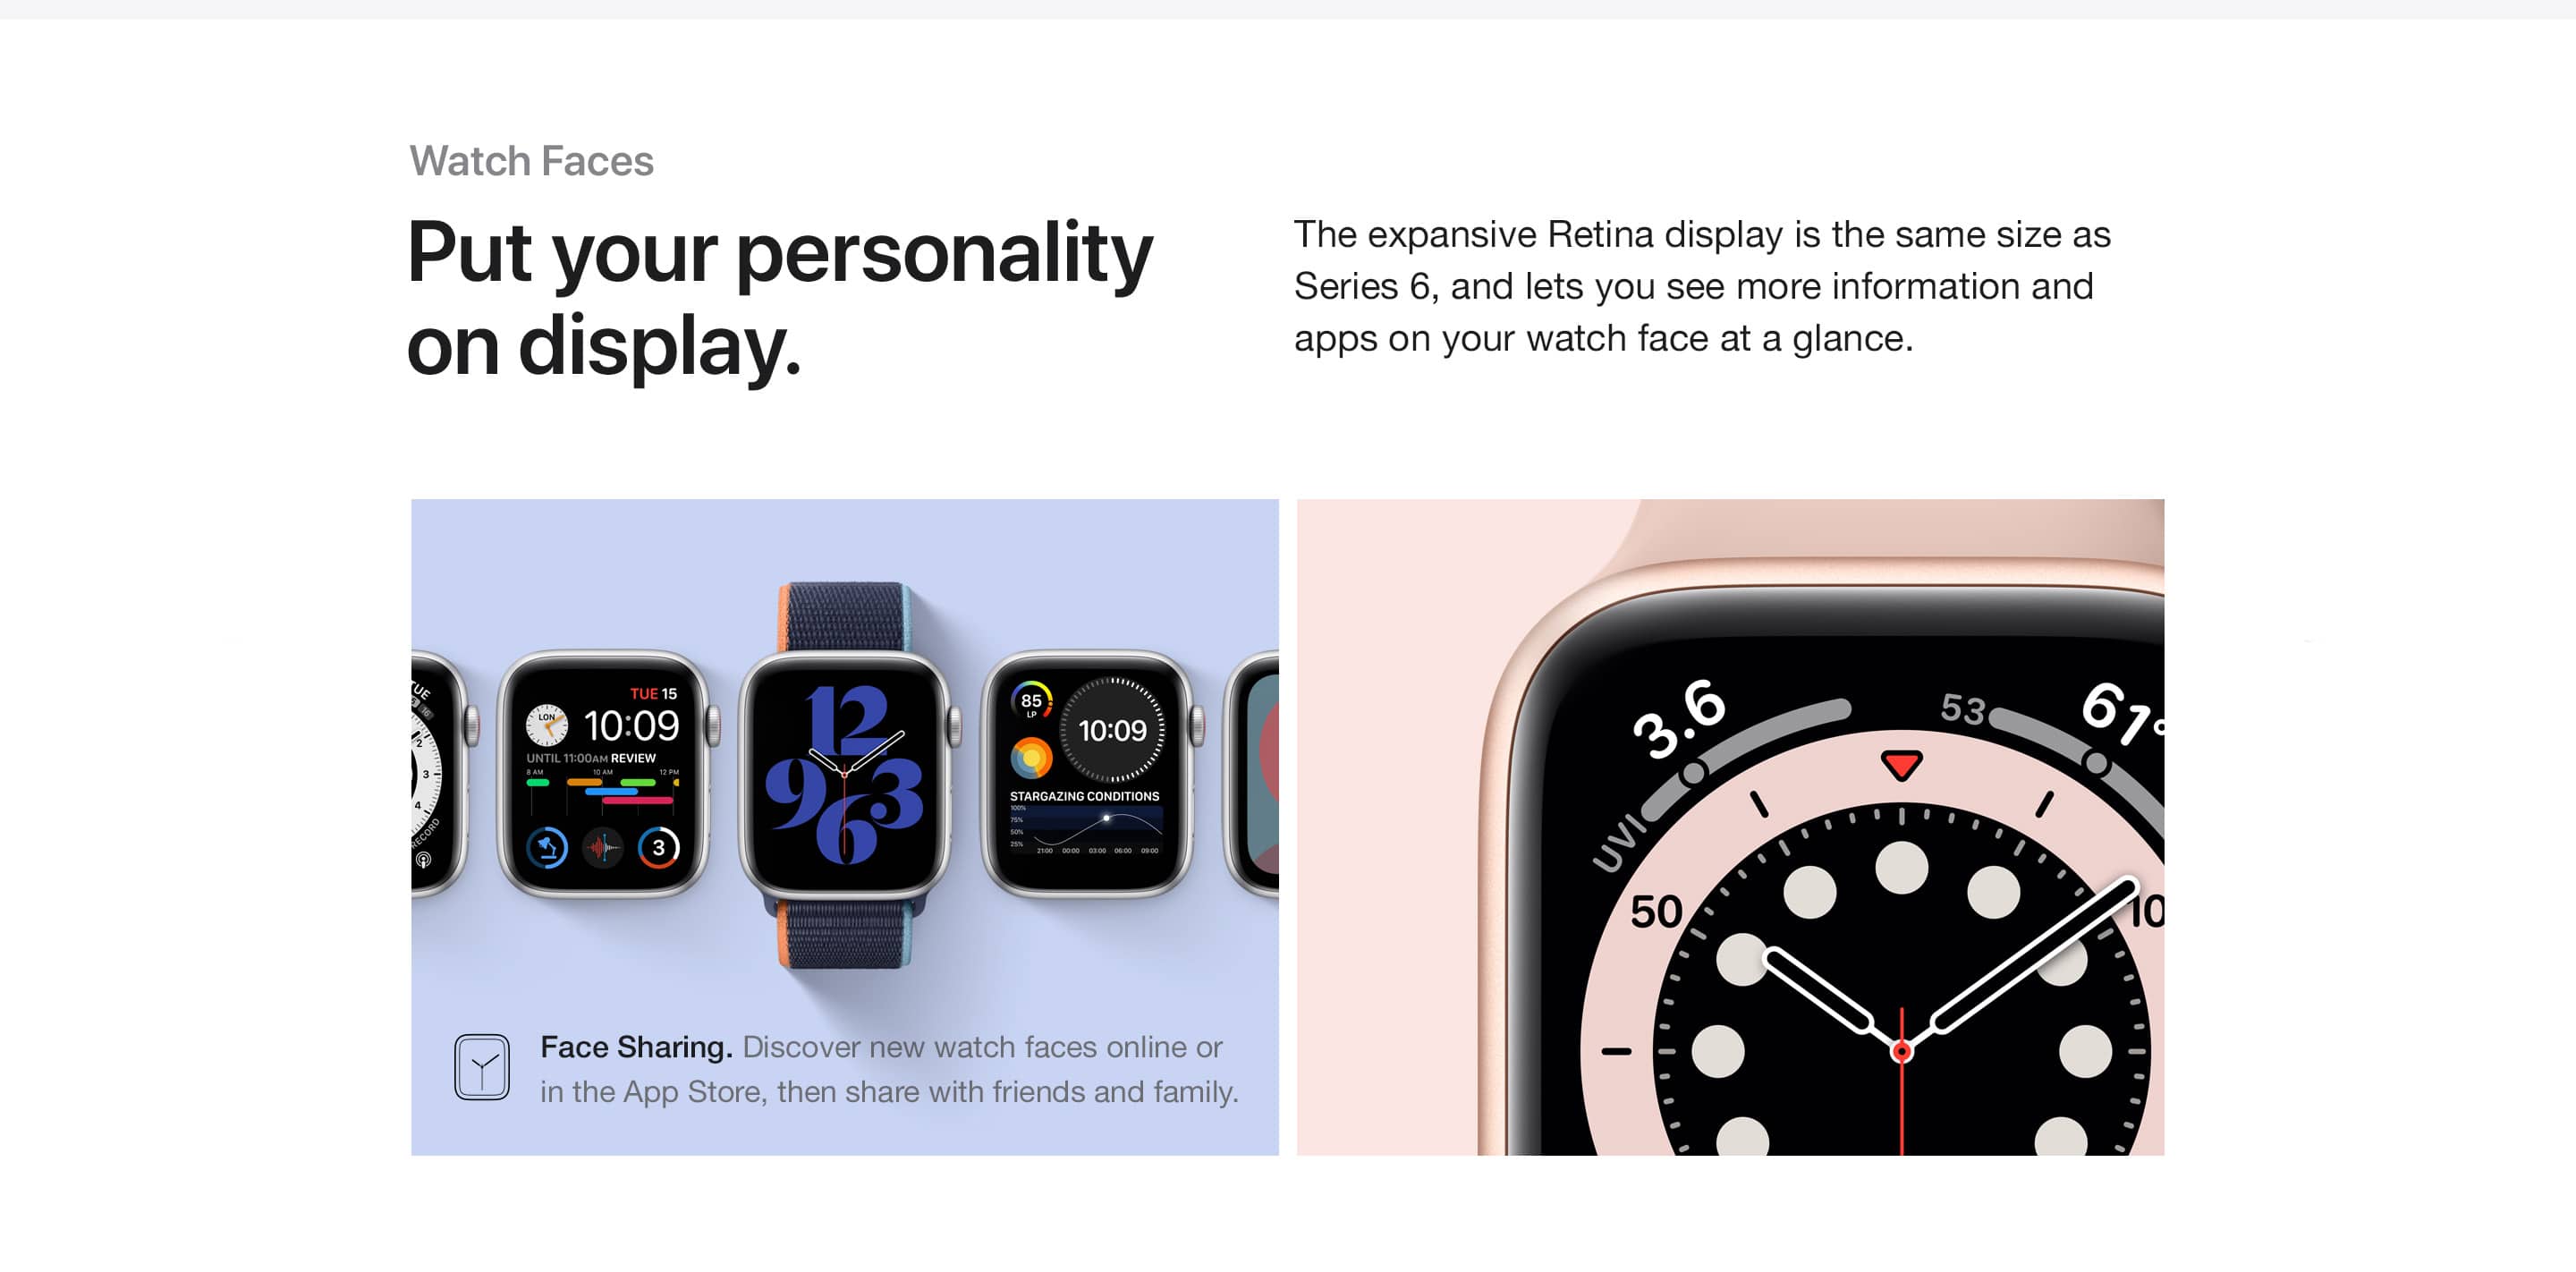 Watch faces. Put your personality on display. The expansive Retina display is the same size as Series 6, and lets you see more information and apps on your watch face at a glance. Face Sharing. Discover new watch faces online or in the App Store, then share with friends and family.